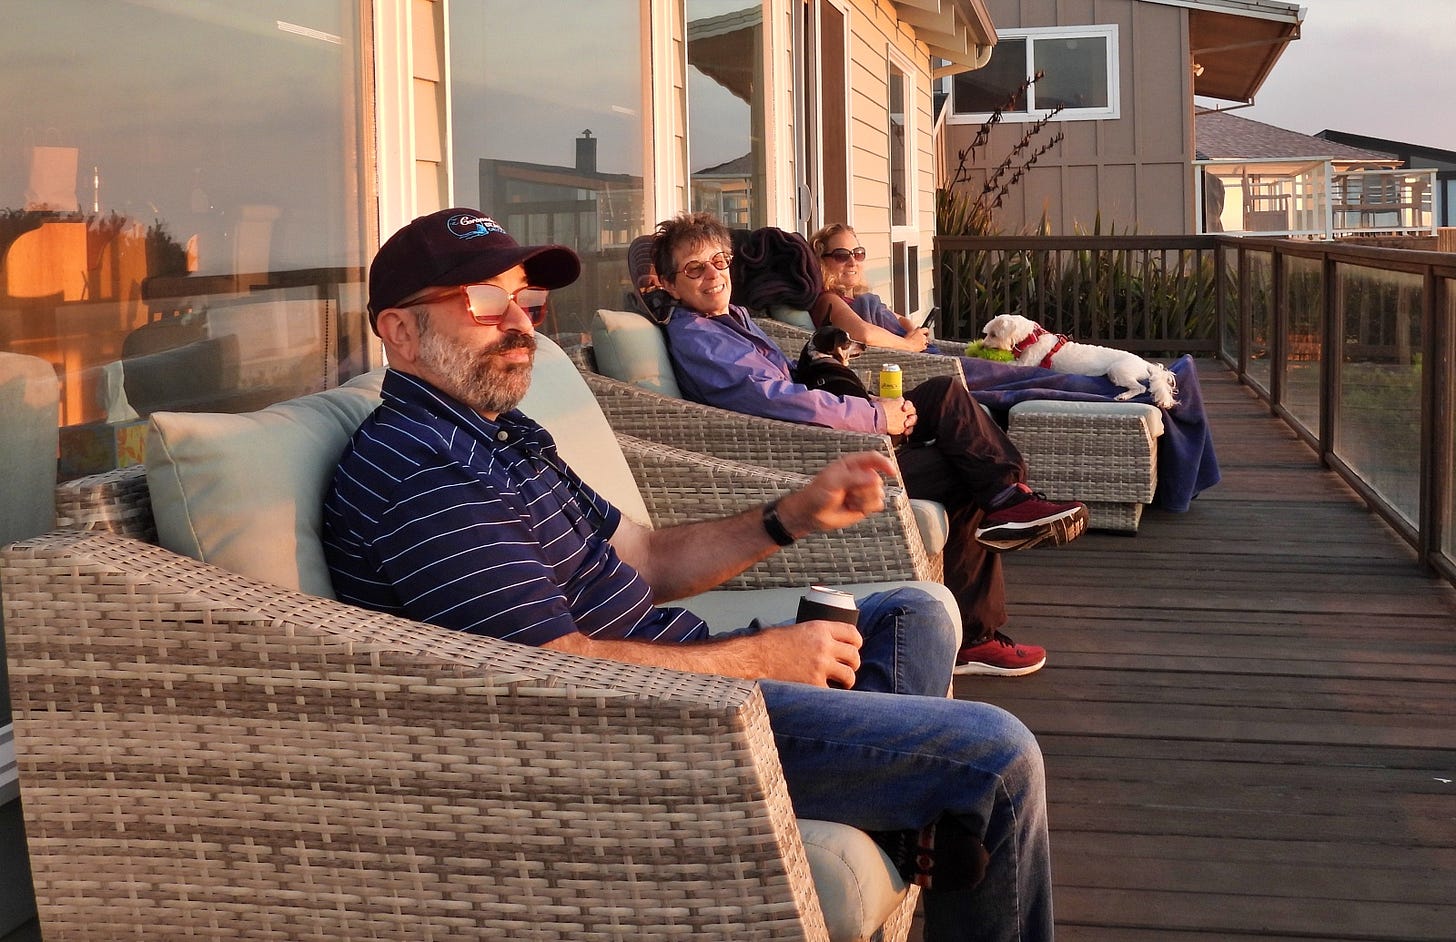 Three people and two dogs sitting on the deck at sunset.